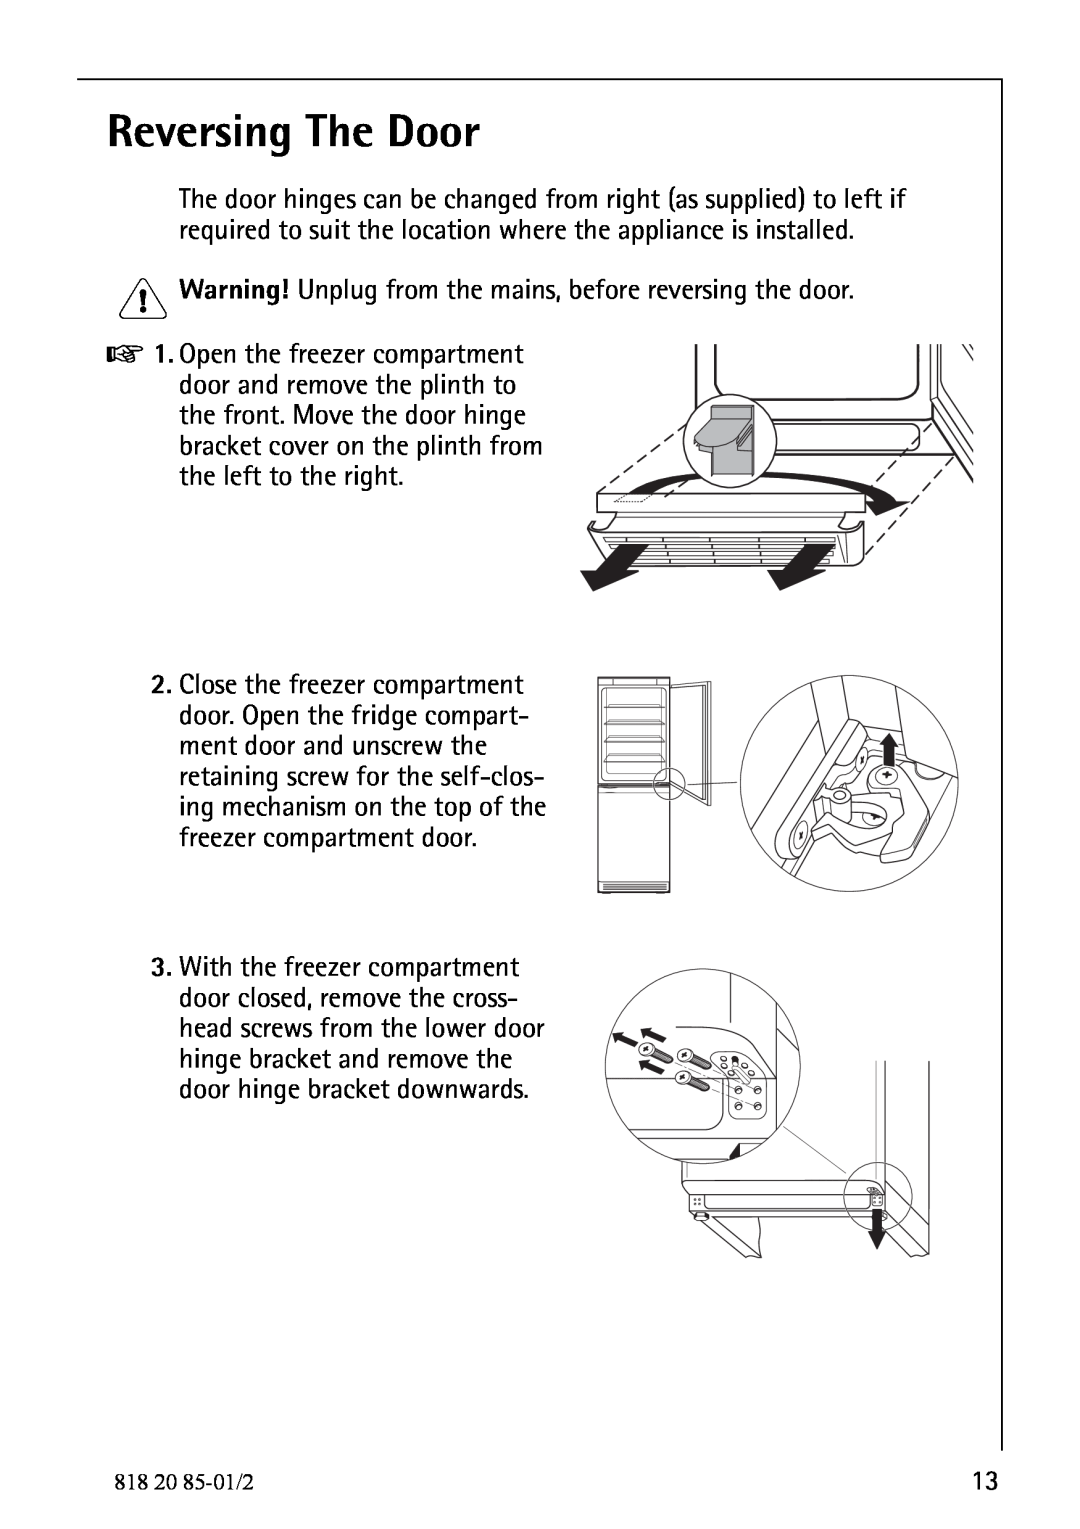 Electrolux 818 20 85 operating instructions Reversing The Door, Warning! Unplug from the mains, before reversing the door 